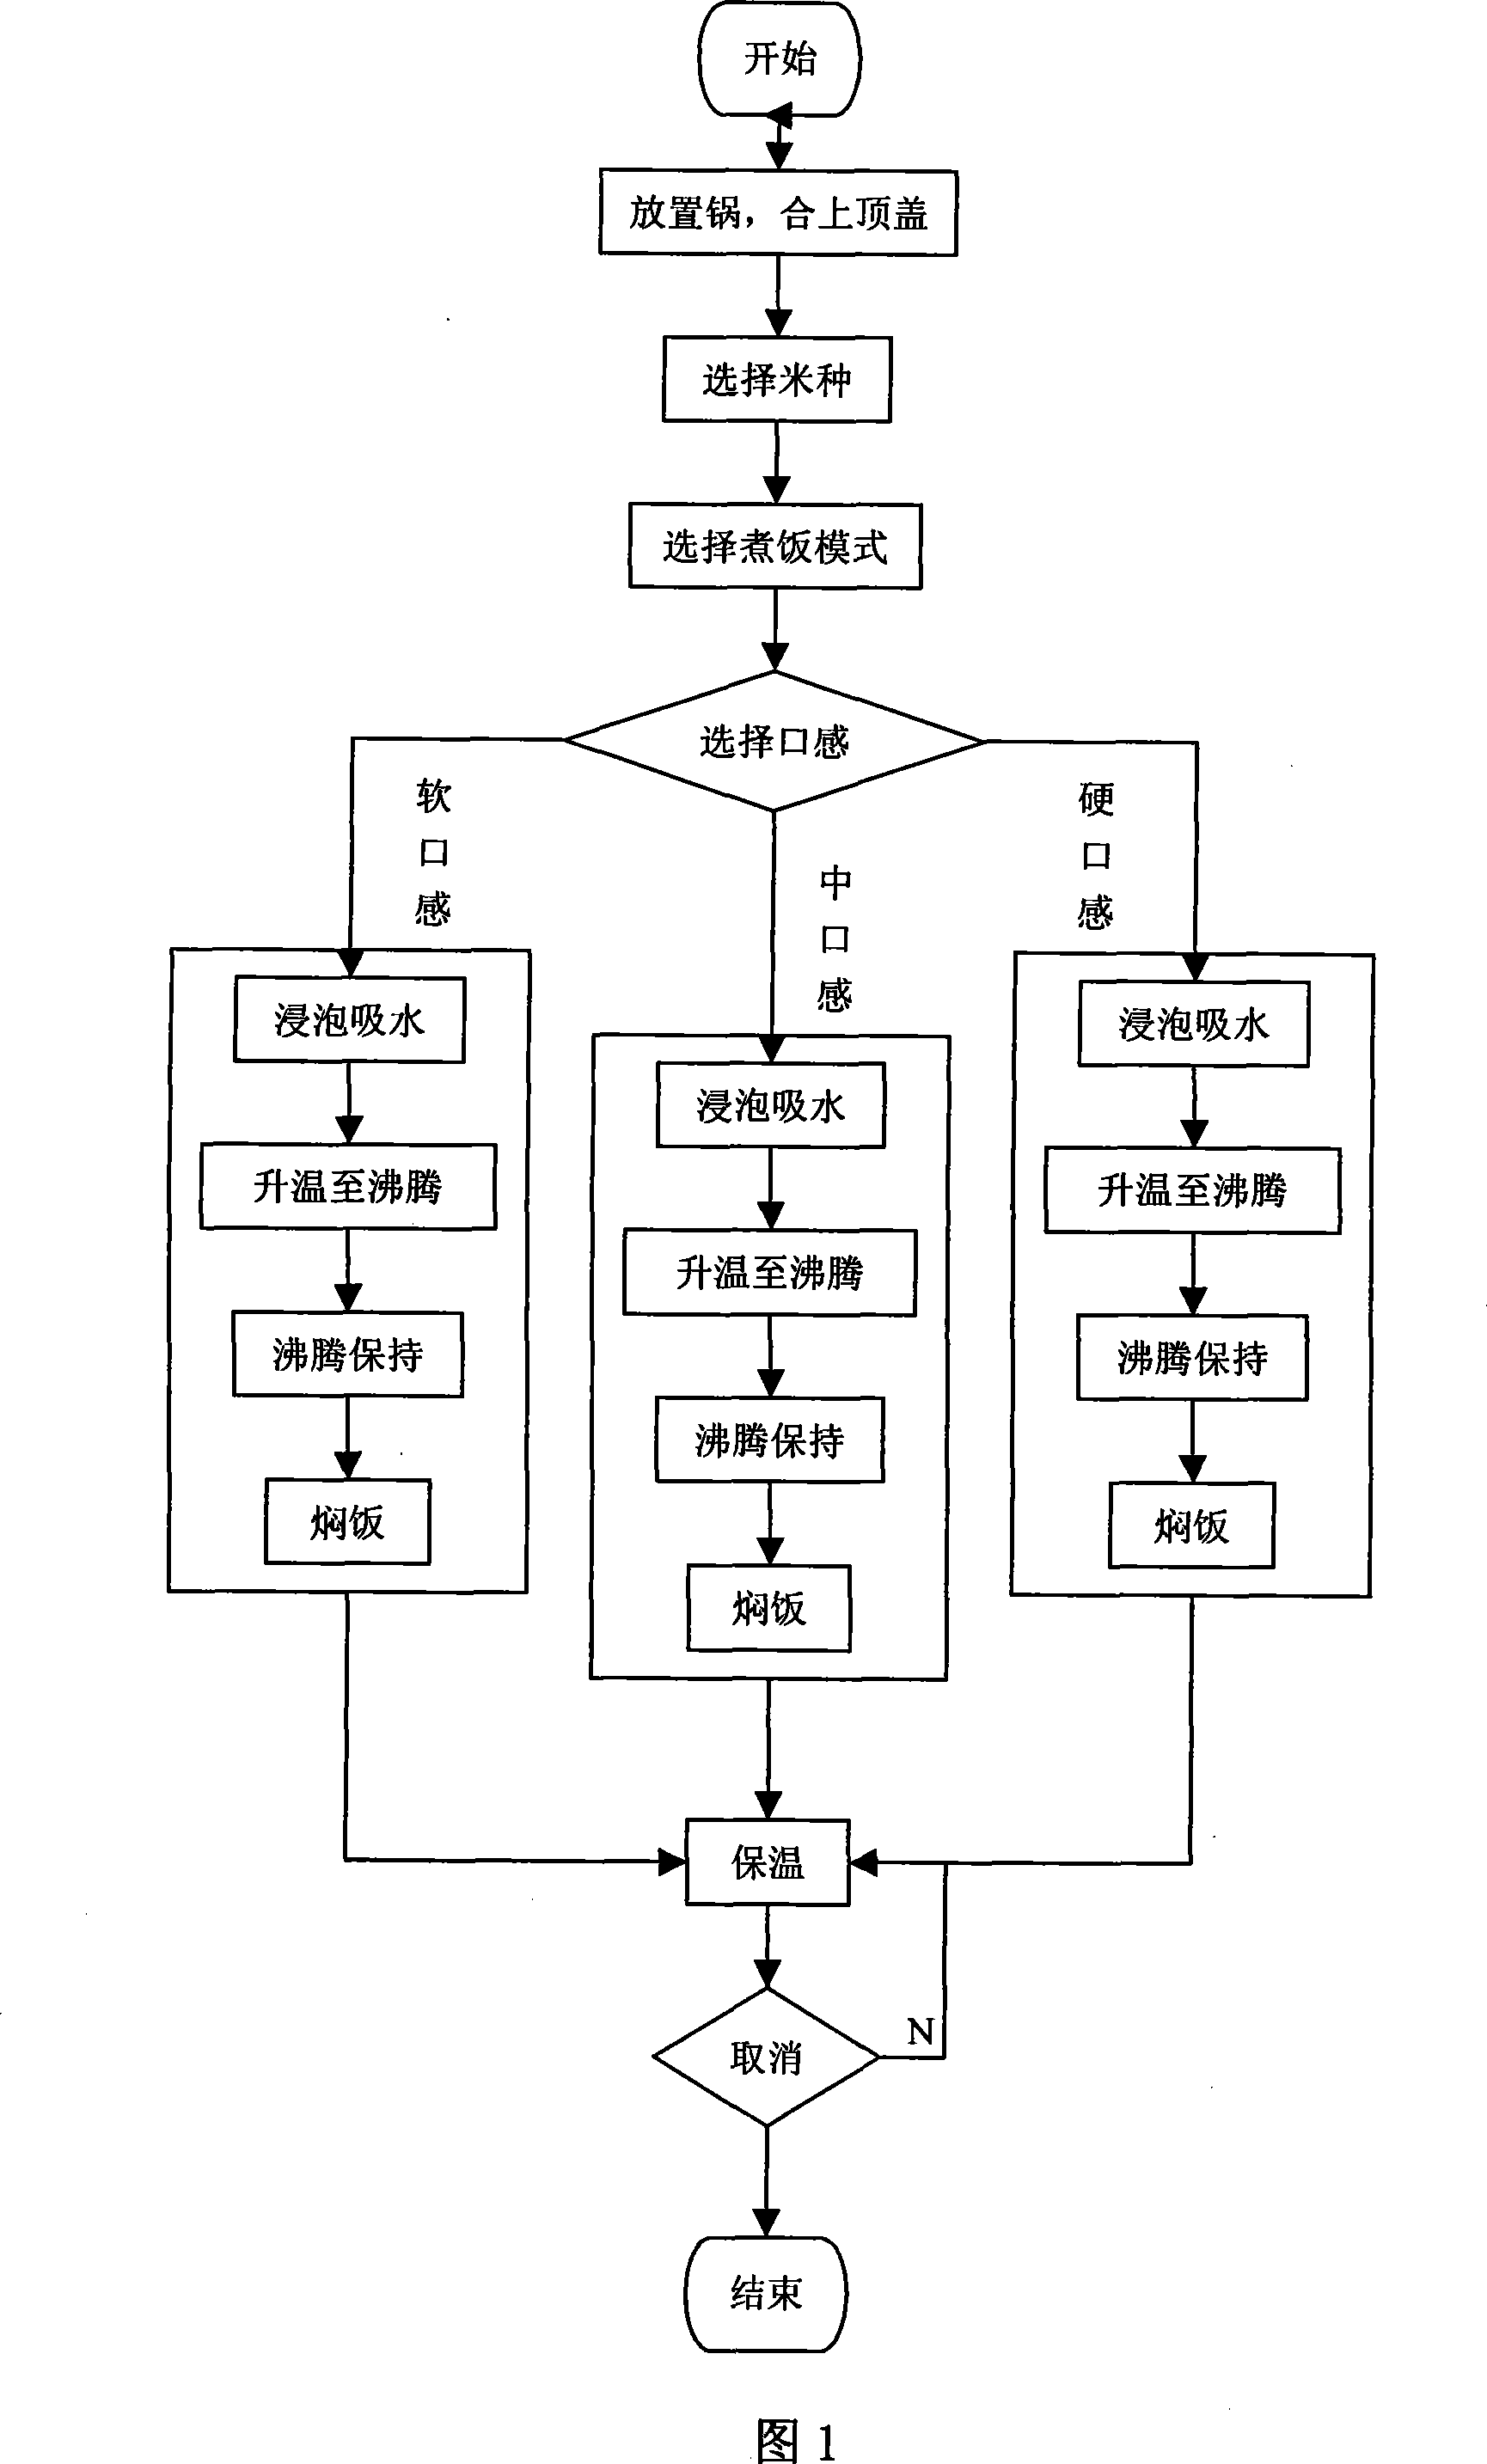 Control method for boiling rice with electric cooker